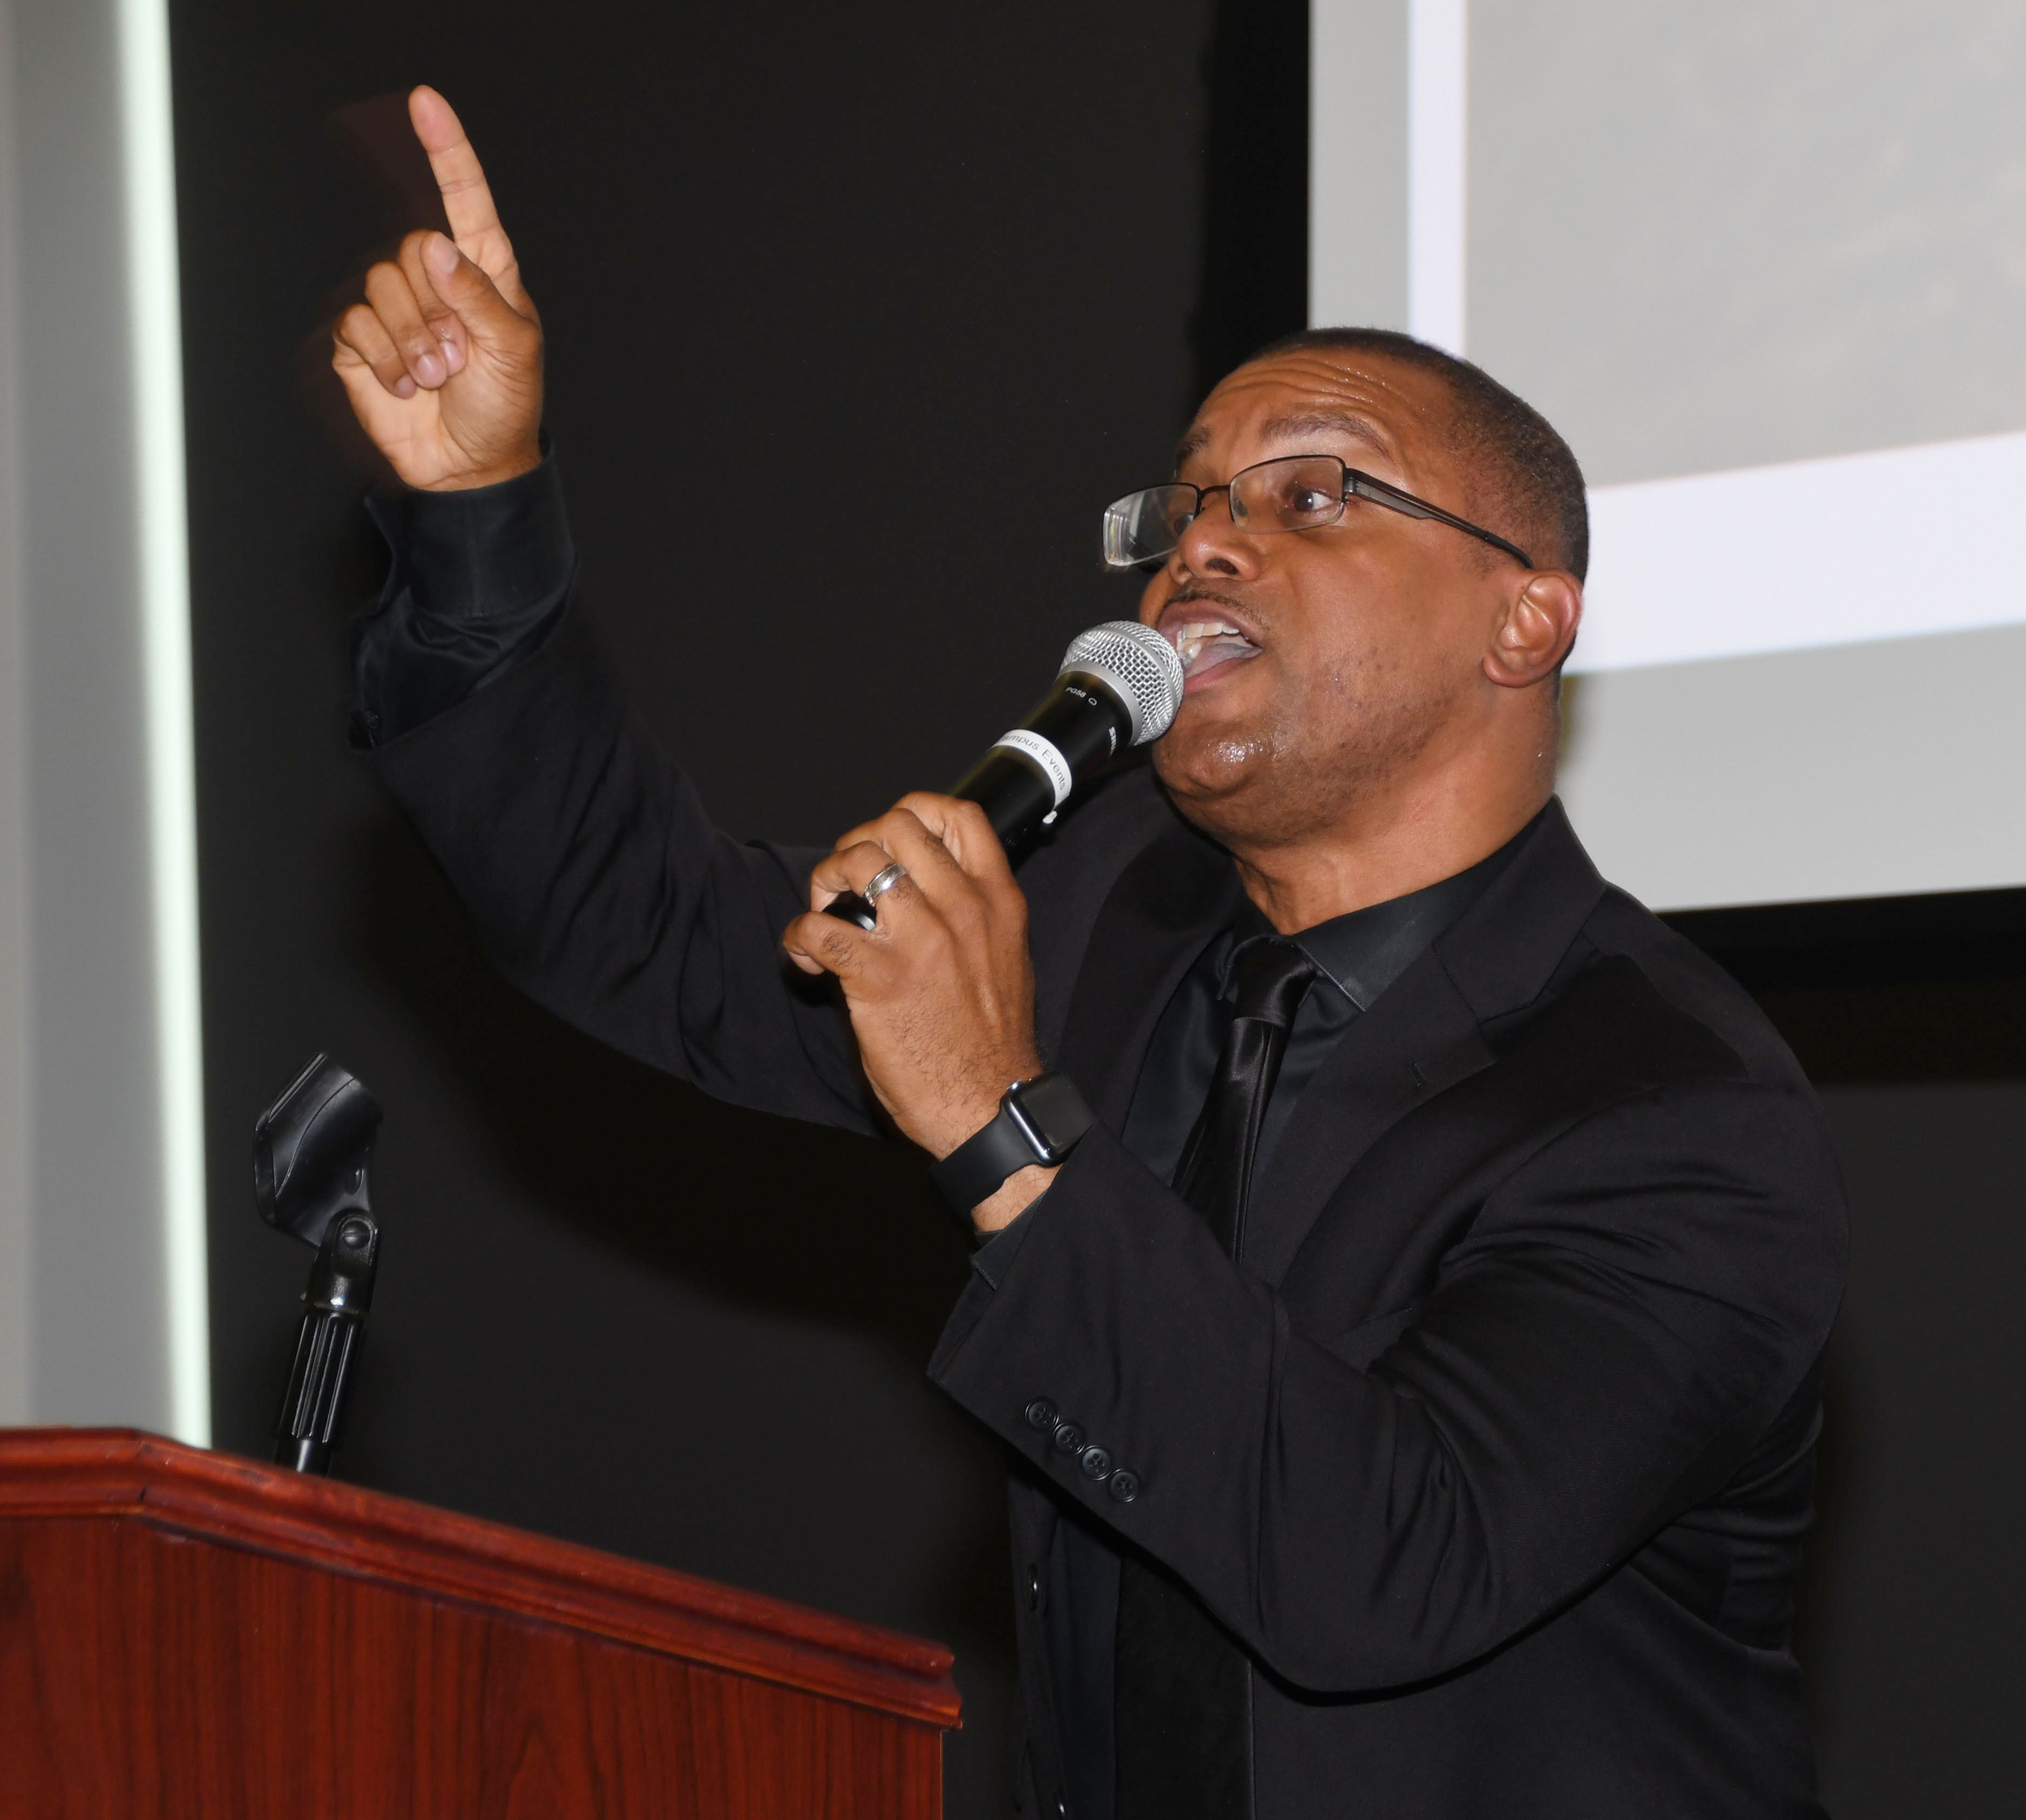 Rev. Patrick Clayborn capitivated the gathering with his dynamic keynote message on "Peace"